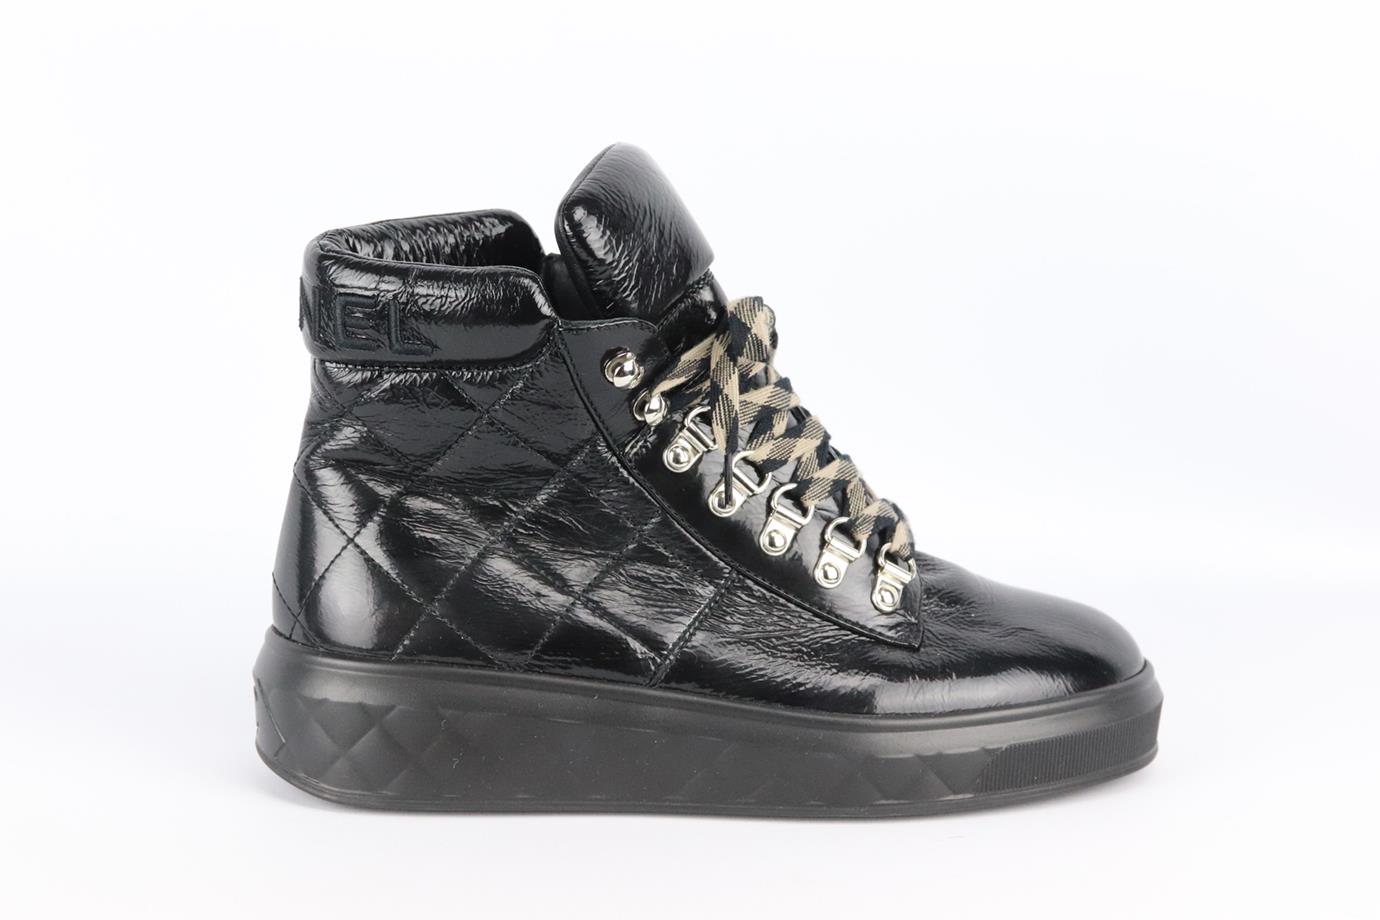 CHANEL 2018 QUILTED PATENT LEATHER ANKLE BOOTS EU 38.5 UK 5.5 US